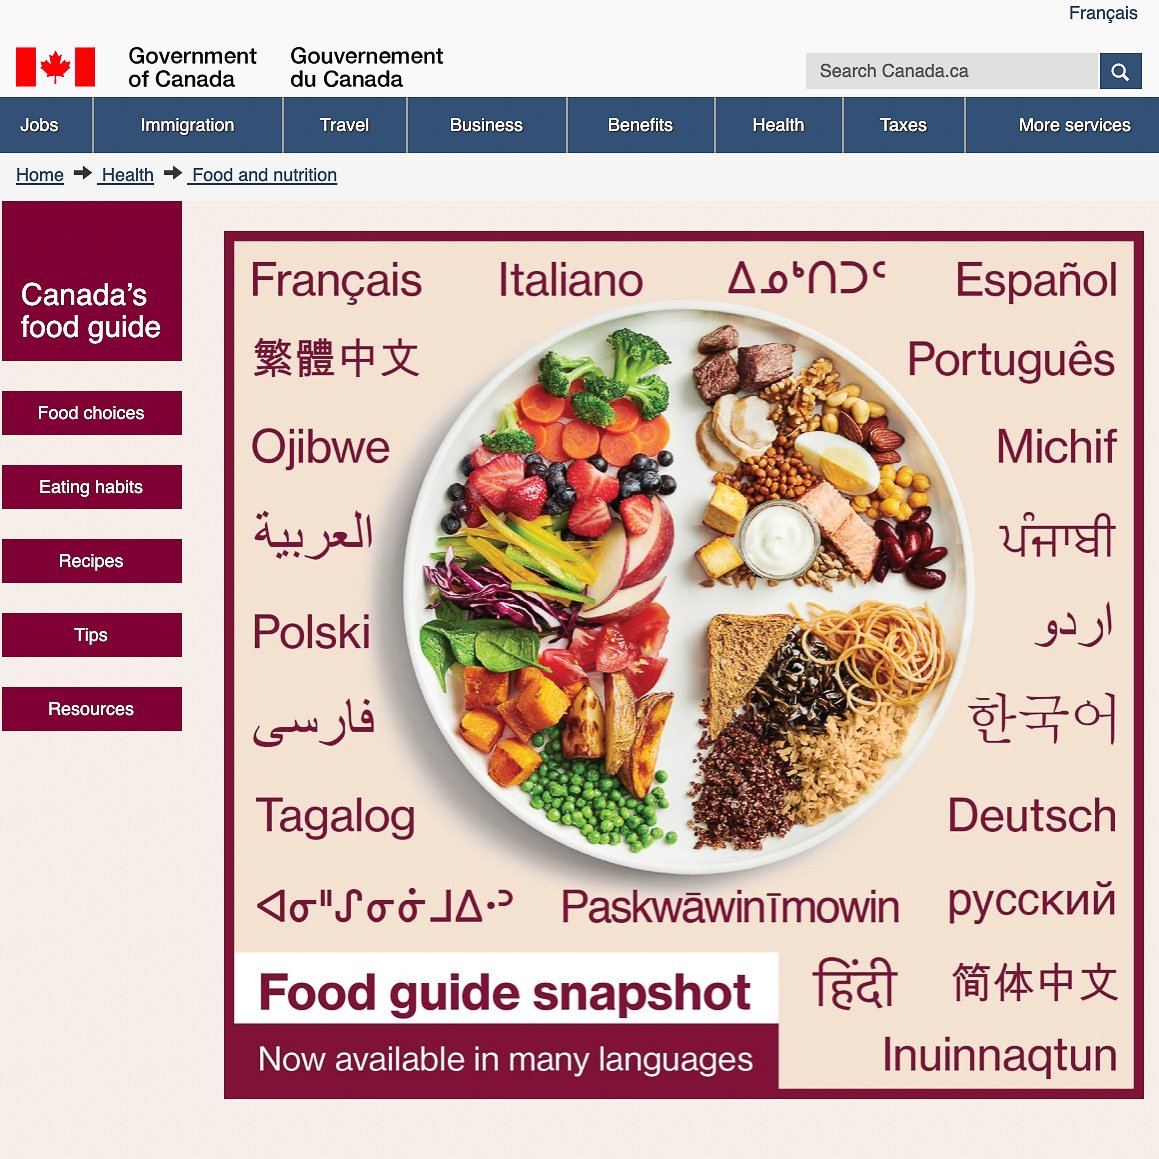 Canada's Food Guide plate with fruits and vegetables, fish, beans, meat and poultry, pasta, bread, rice and grains written in different languages